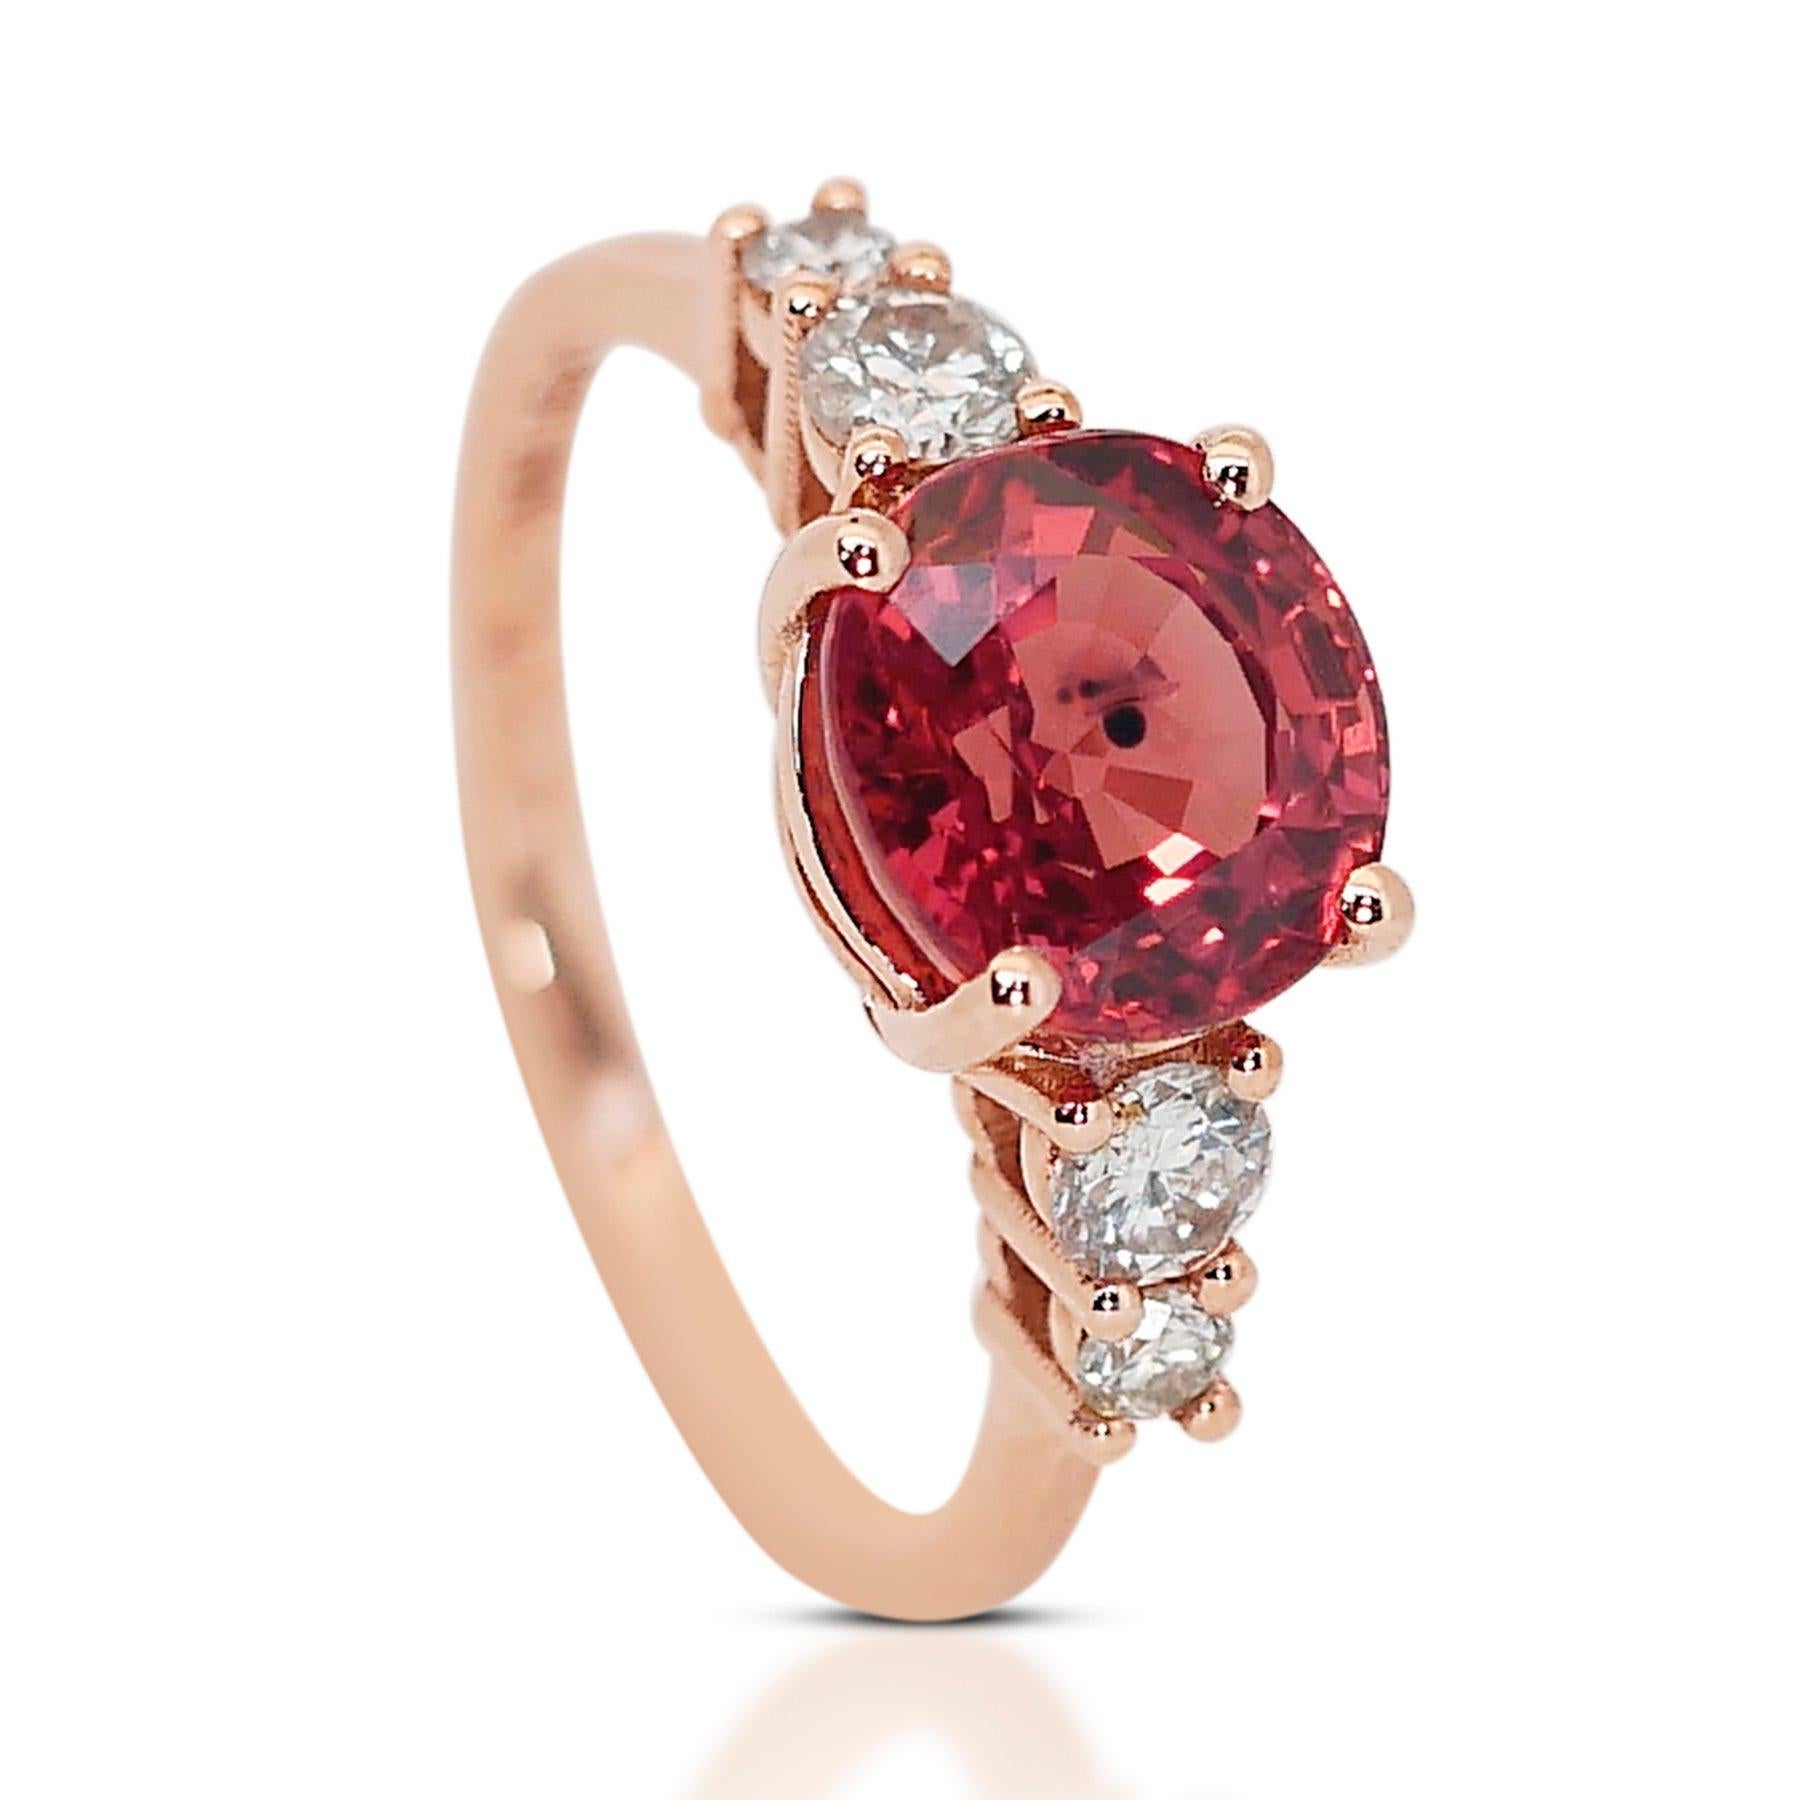 Stunning 3.85ct Sapphire and Diamonds Pave Ring in 18k Rose Gold - IGI Certified

Elevate your style with this luxurious 18k rose gold sapphire and diamond pave ring, featuring a breathtaking 3.45-carat oval-shaped sapphire in a mesmerizing dark